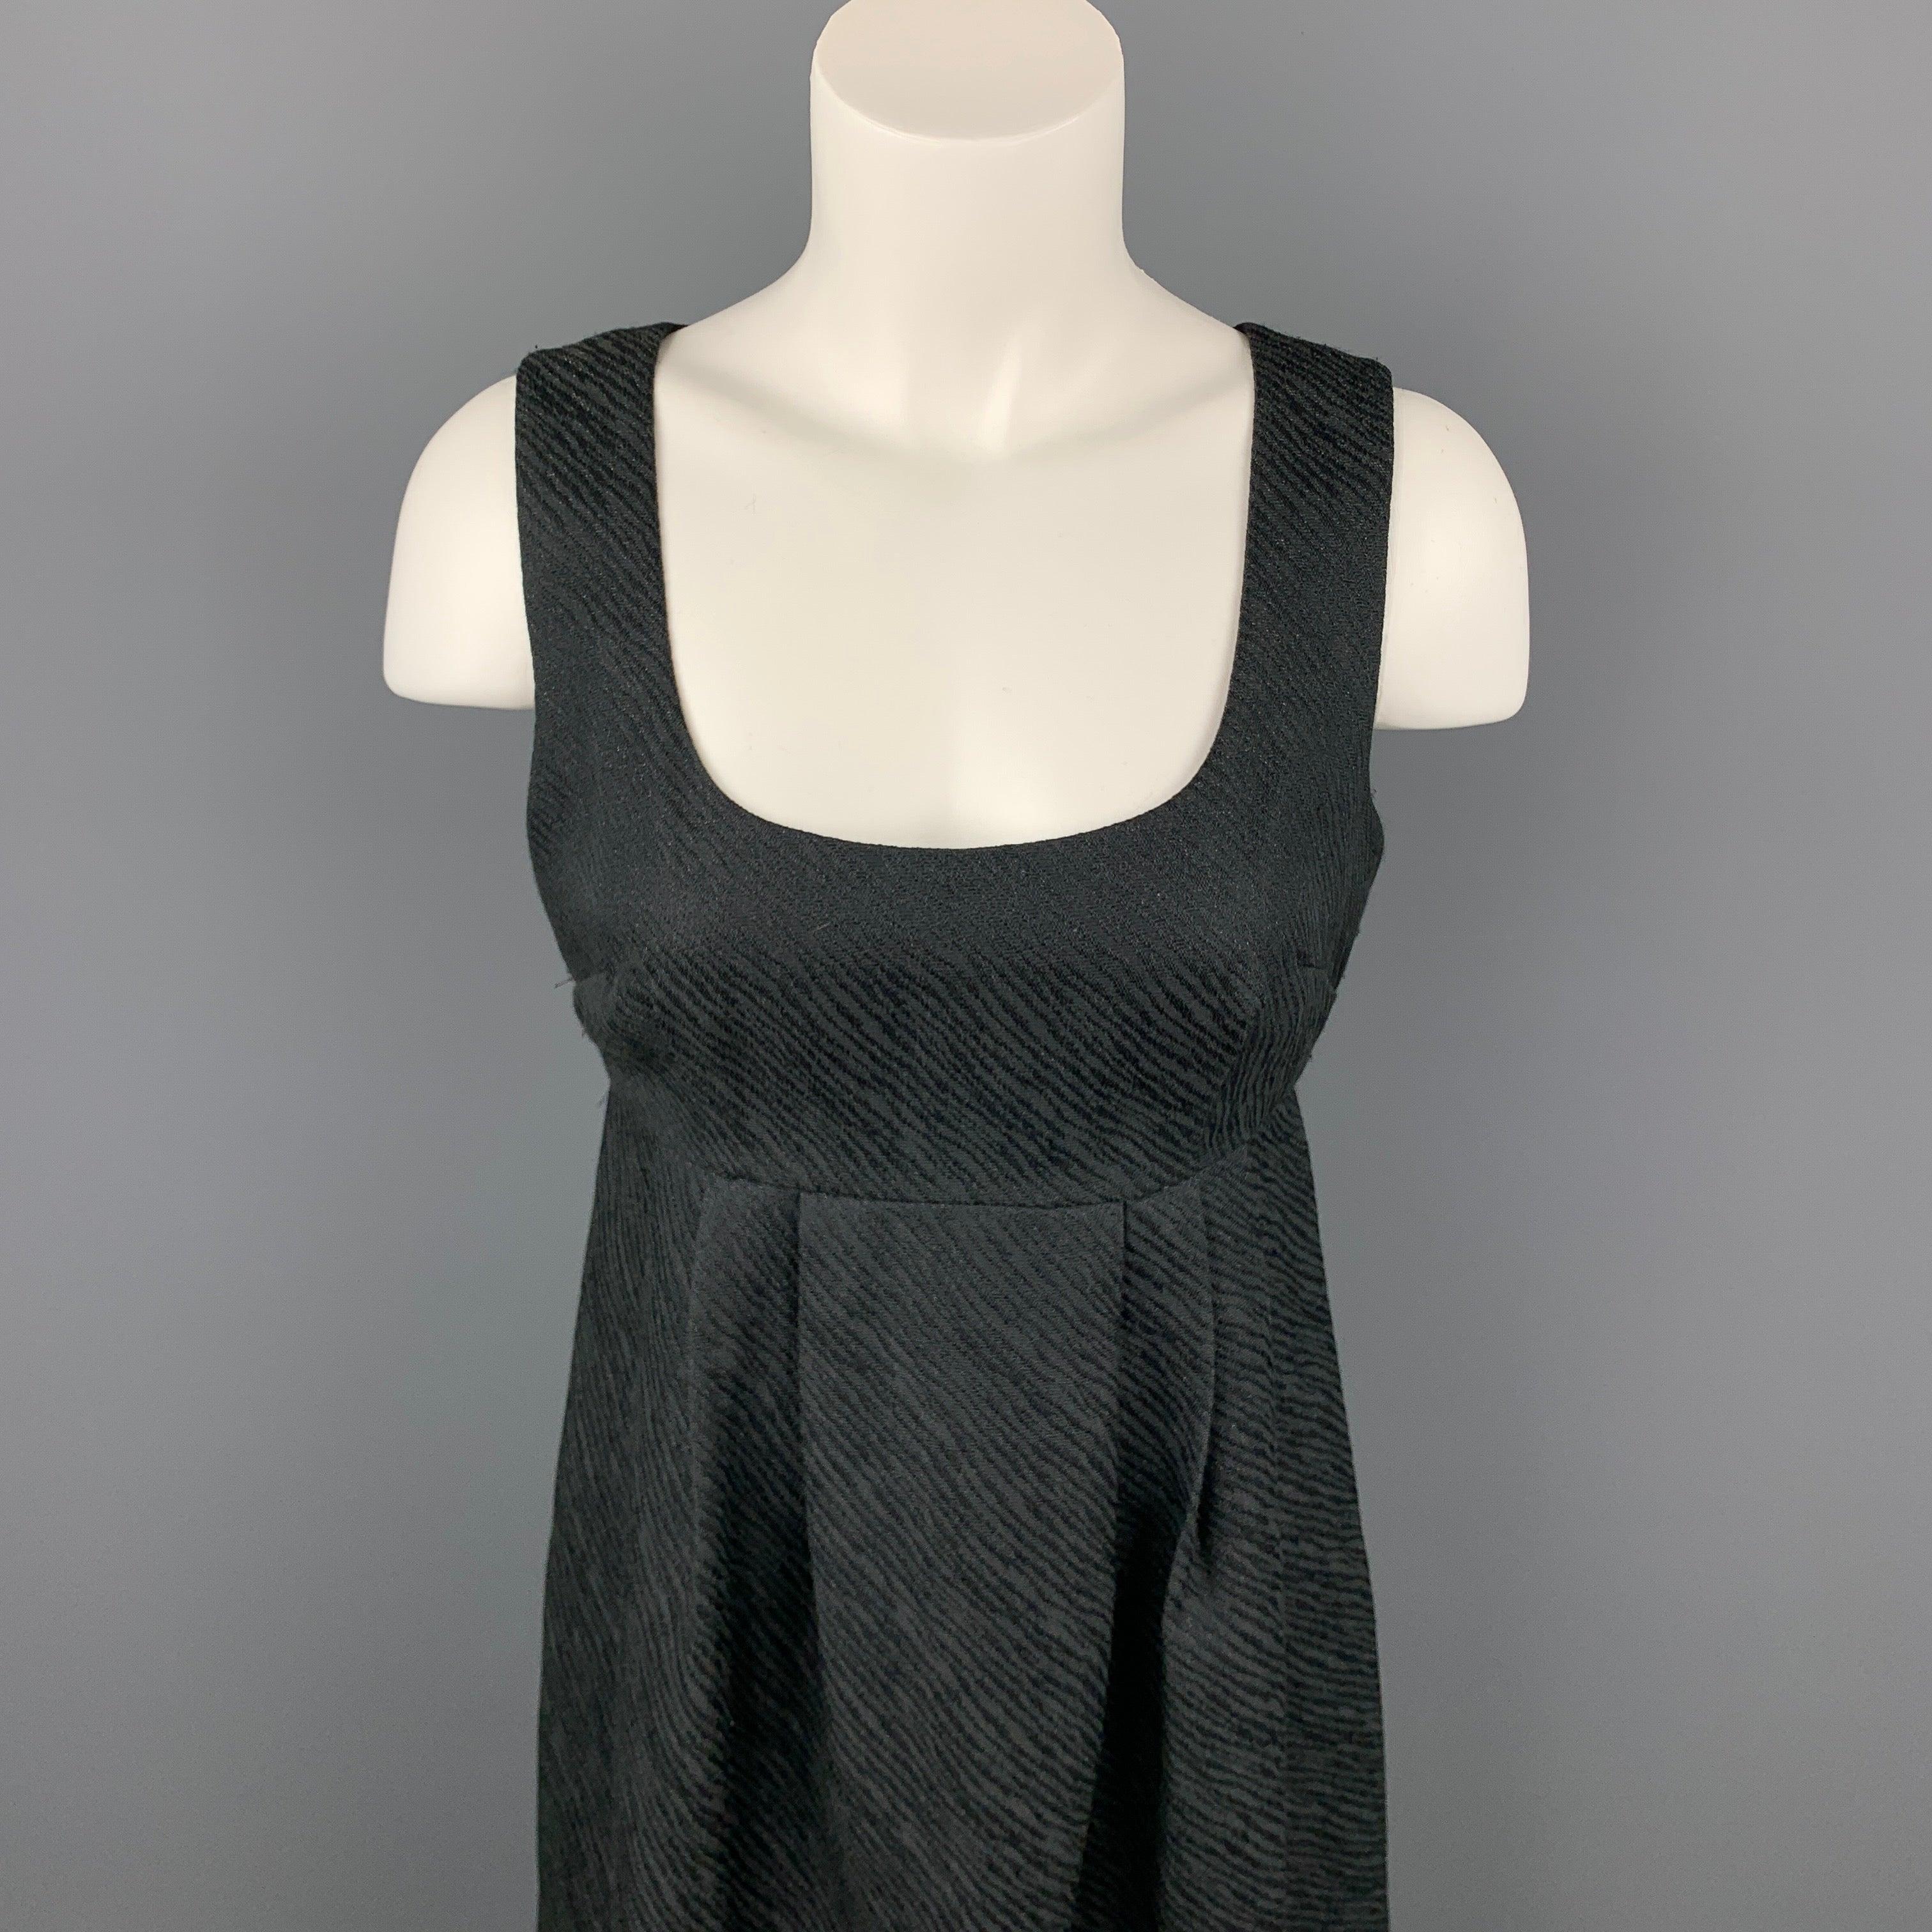 MICHAEL KORS dress comes in a black woven polyester blend with metallic thread details featuring a empire waist and a back zip up closure.
Good
Pre-Owned Condition. 

Marked:  4 

Measurements: 
 
Shoulder: 13 inches 
Bust: 32 inches 
Waist: 30